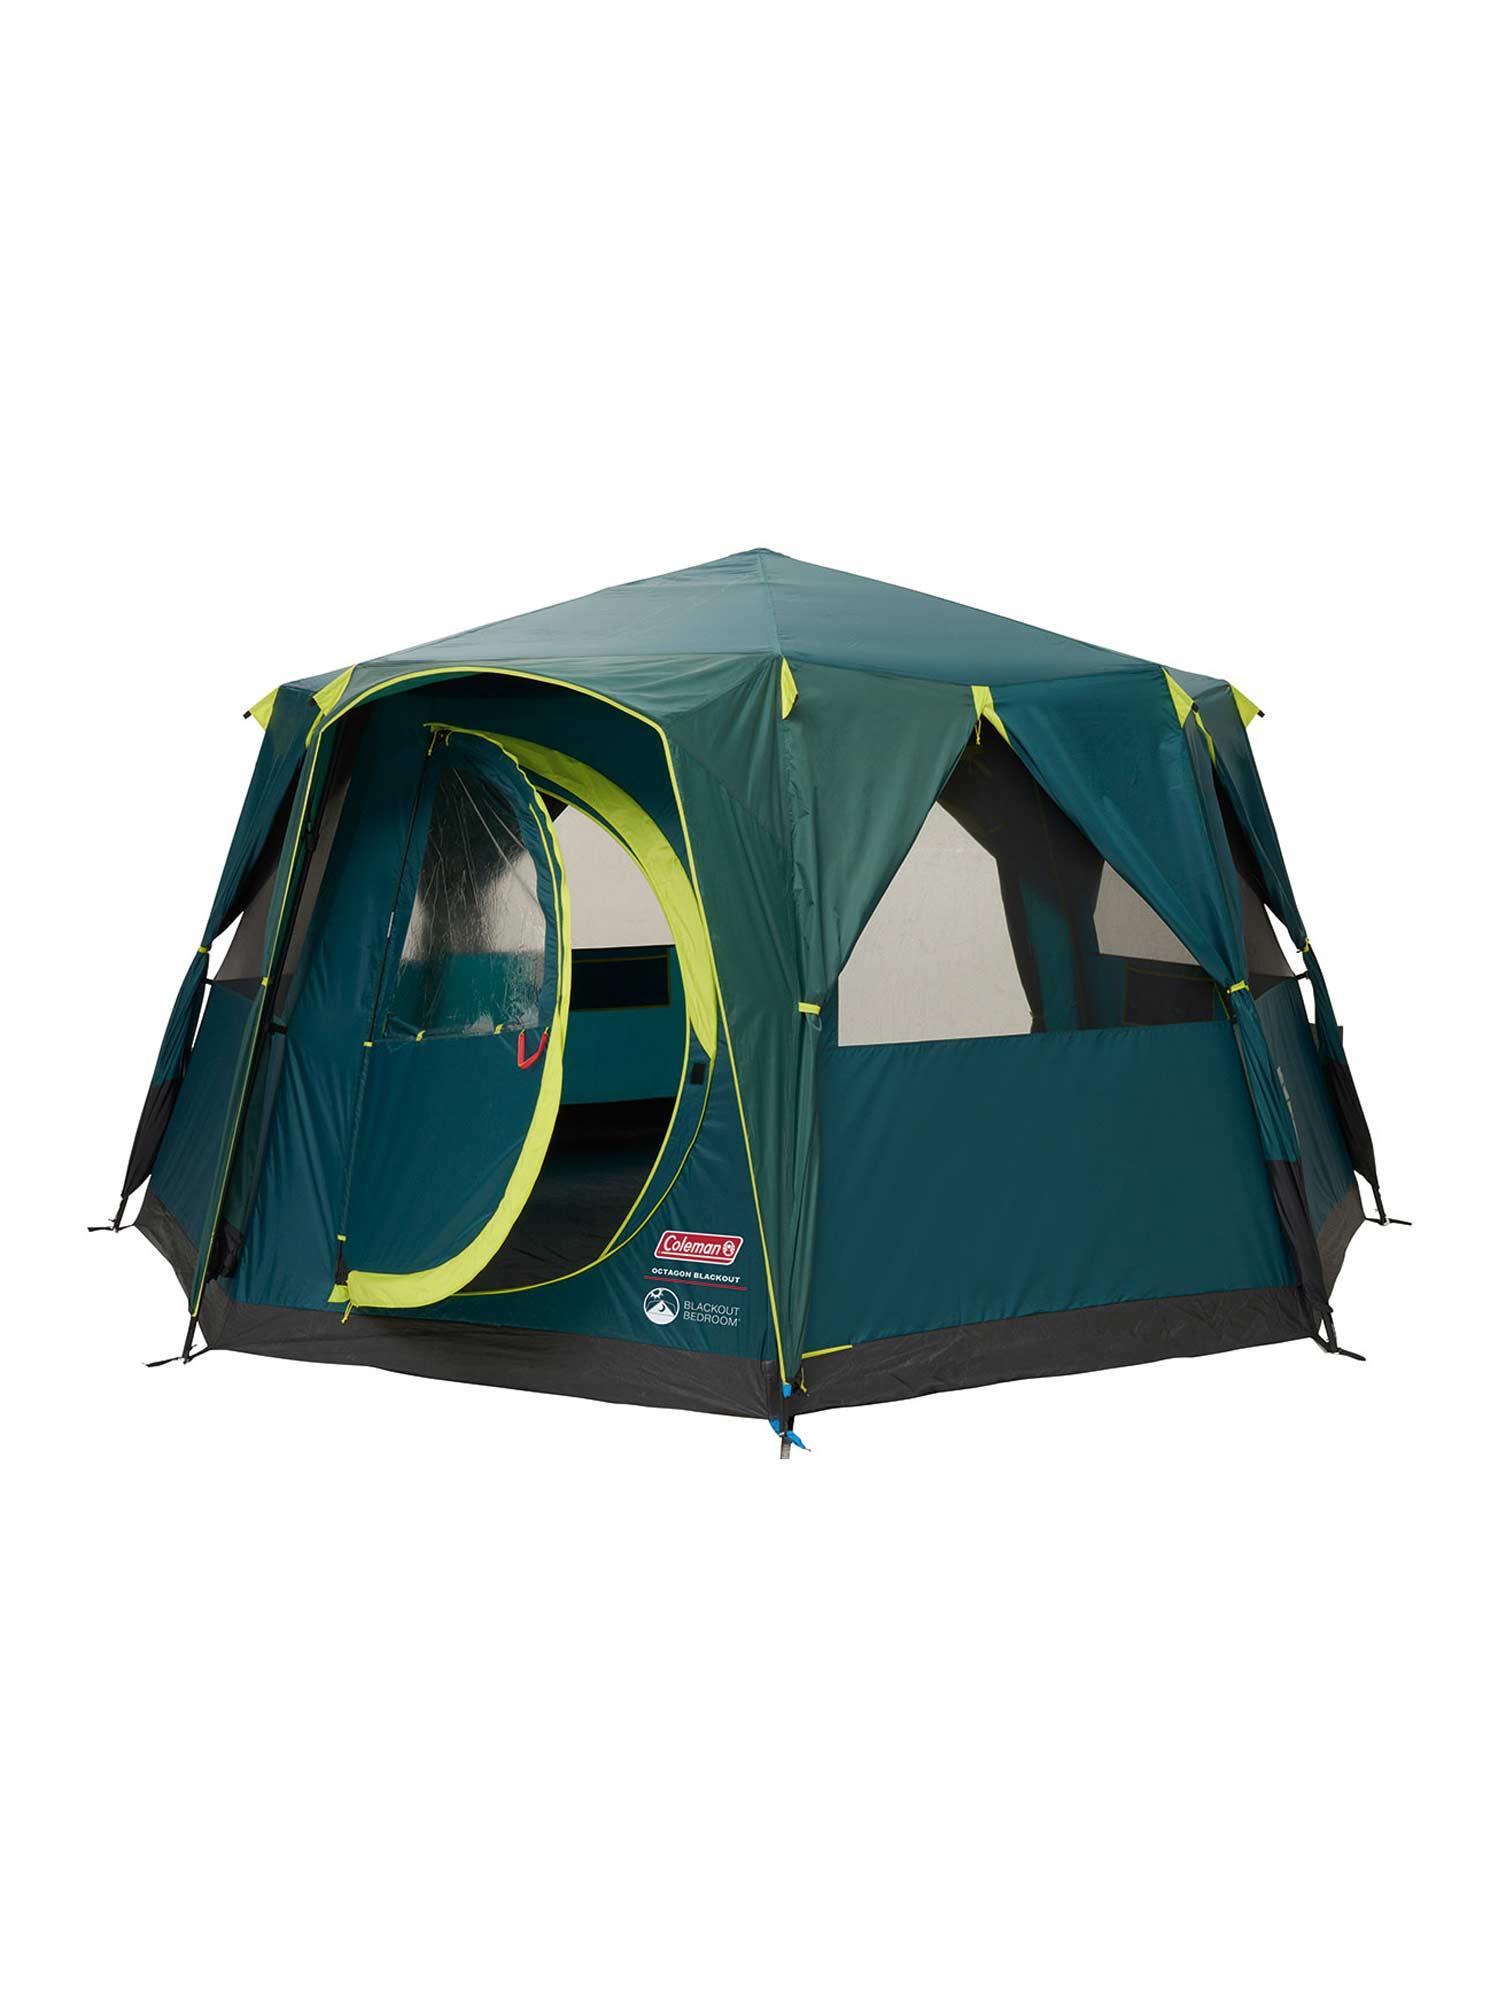 Selected image for COLEMAN Šator OCTAGON OUT BEDROOM Tent plava